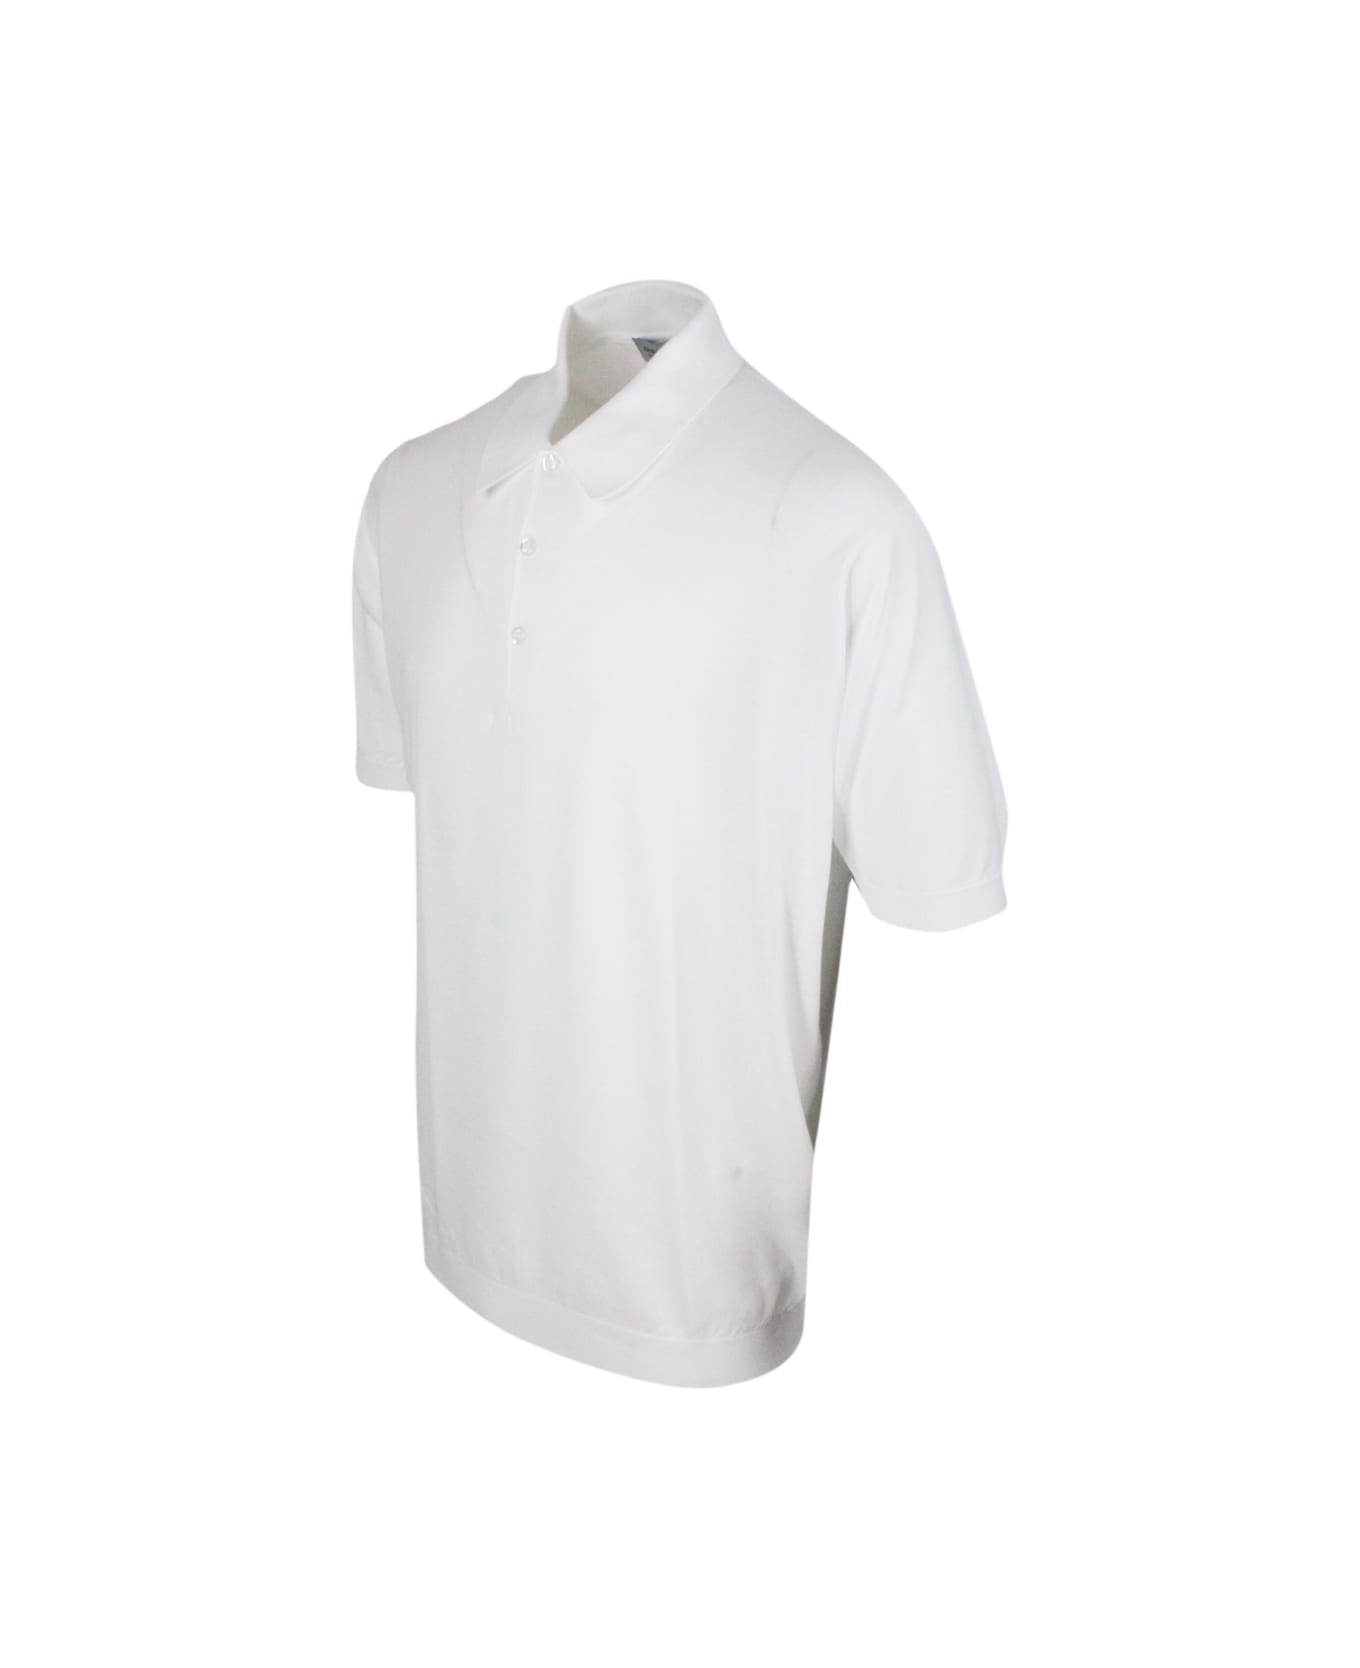 John Smedley Short-sleeved Polo Shirt In Extra-fine Cotton Thread With Three Buttons - White